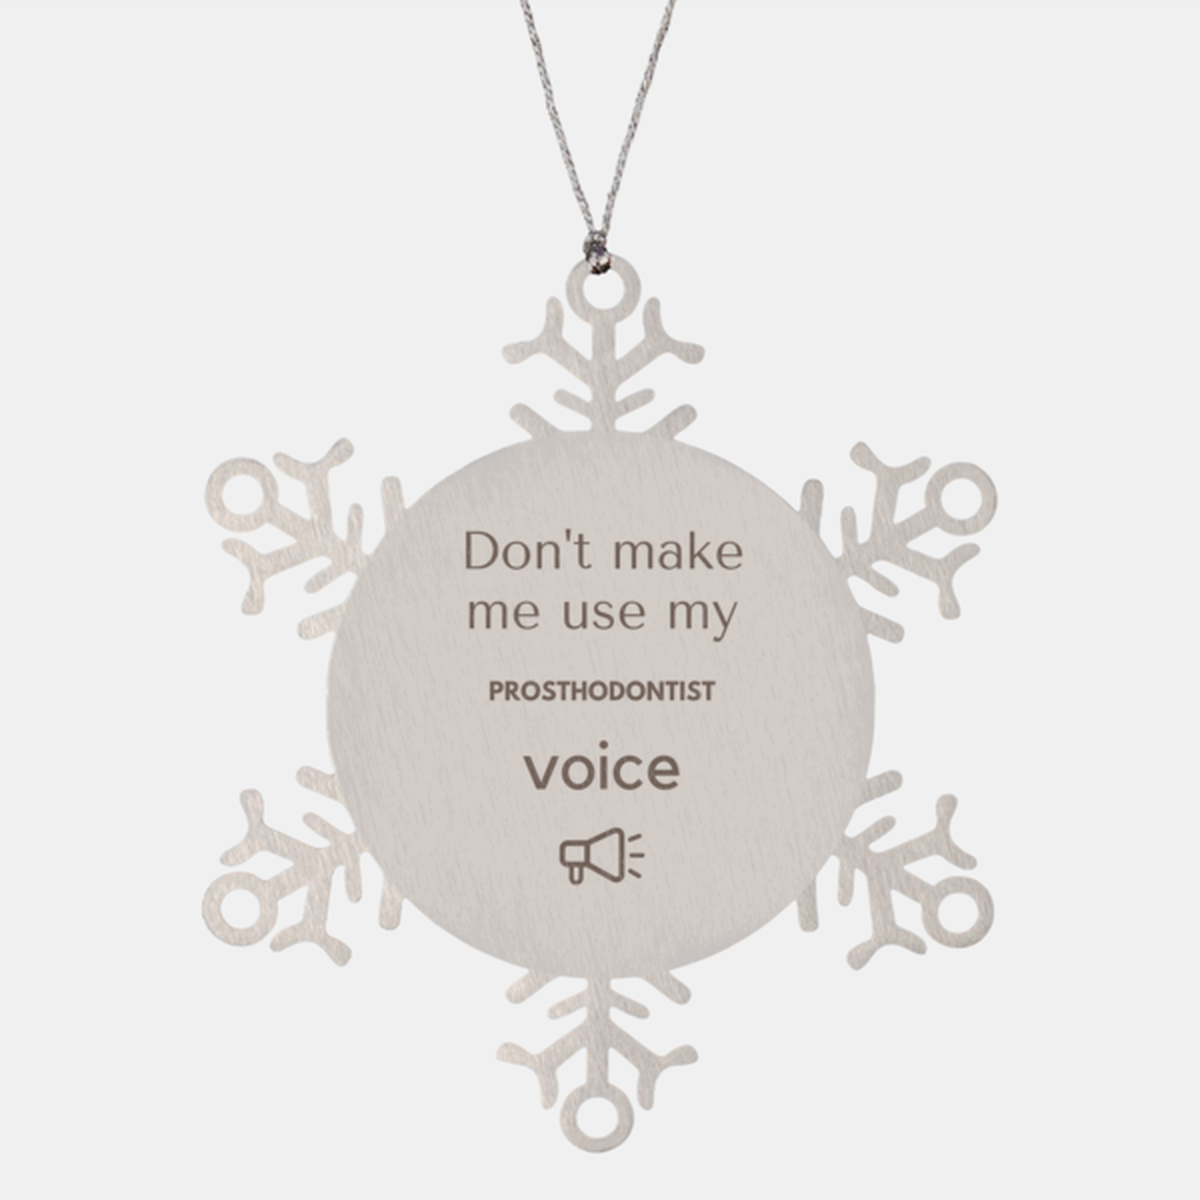 Don't make me use my Prosthodontist voice, Sarcasm Prosthodontist Ornament Gifts, Christmas Prosthodontist Snowflake Ornament Unique Gifts For Prosthodontist Coworkers, Men, Women, Colleague, Friends